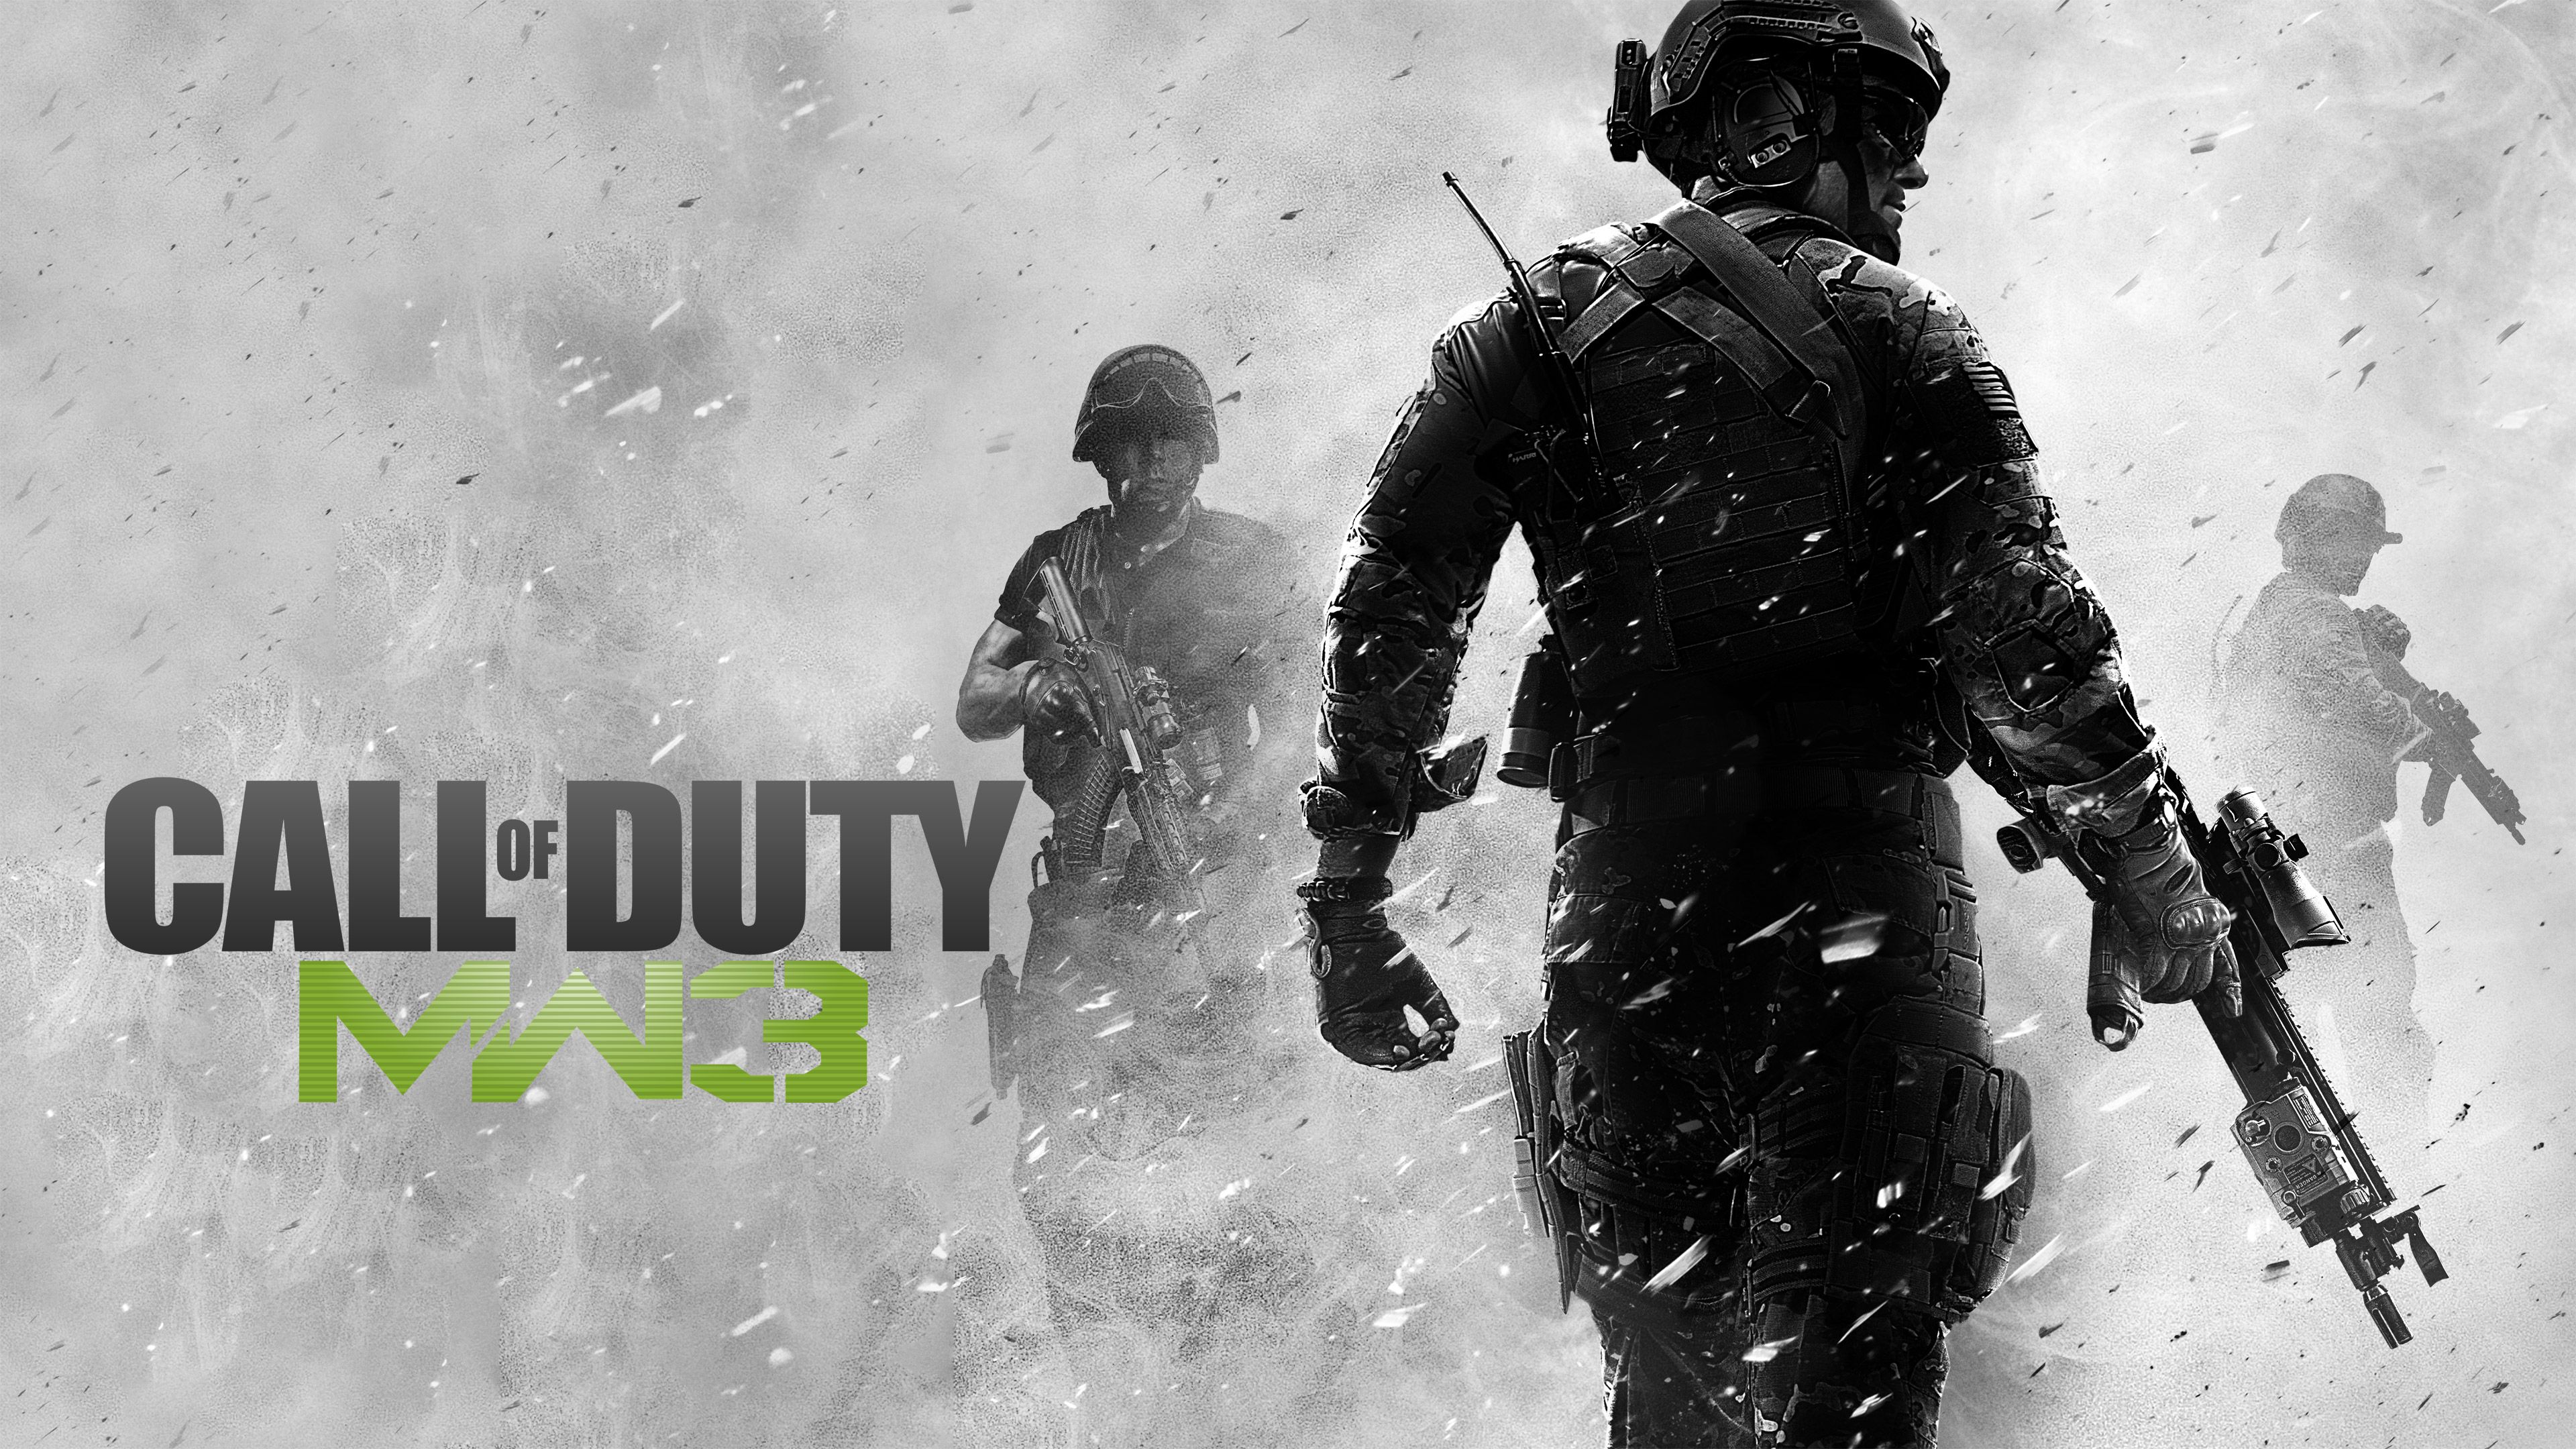 Download Call Of Duty Mw3 Wallpaper 1080p